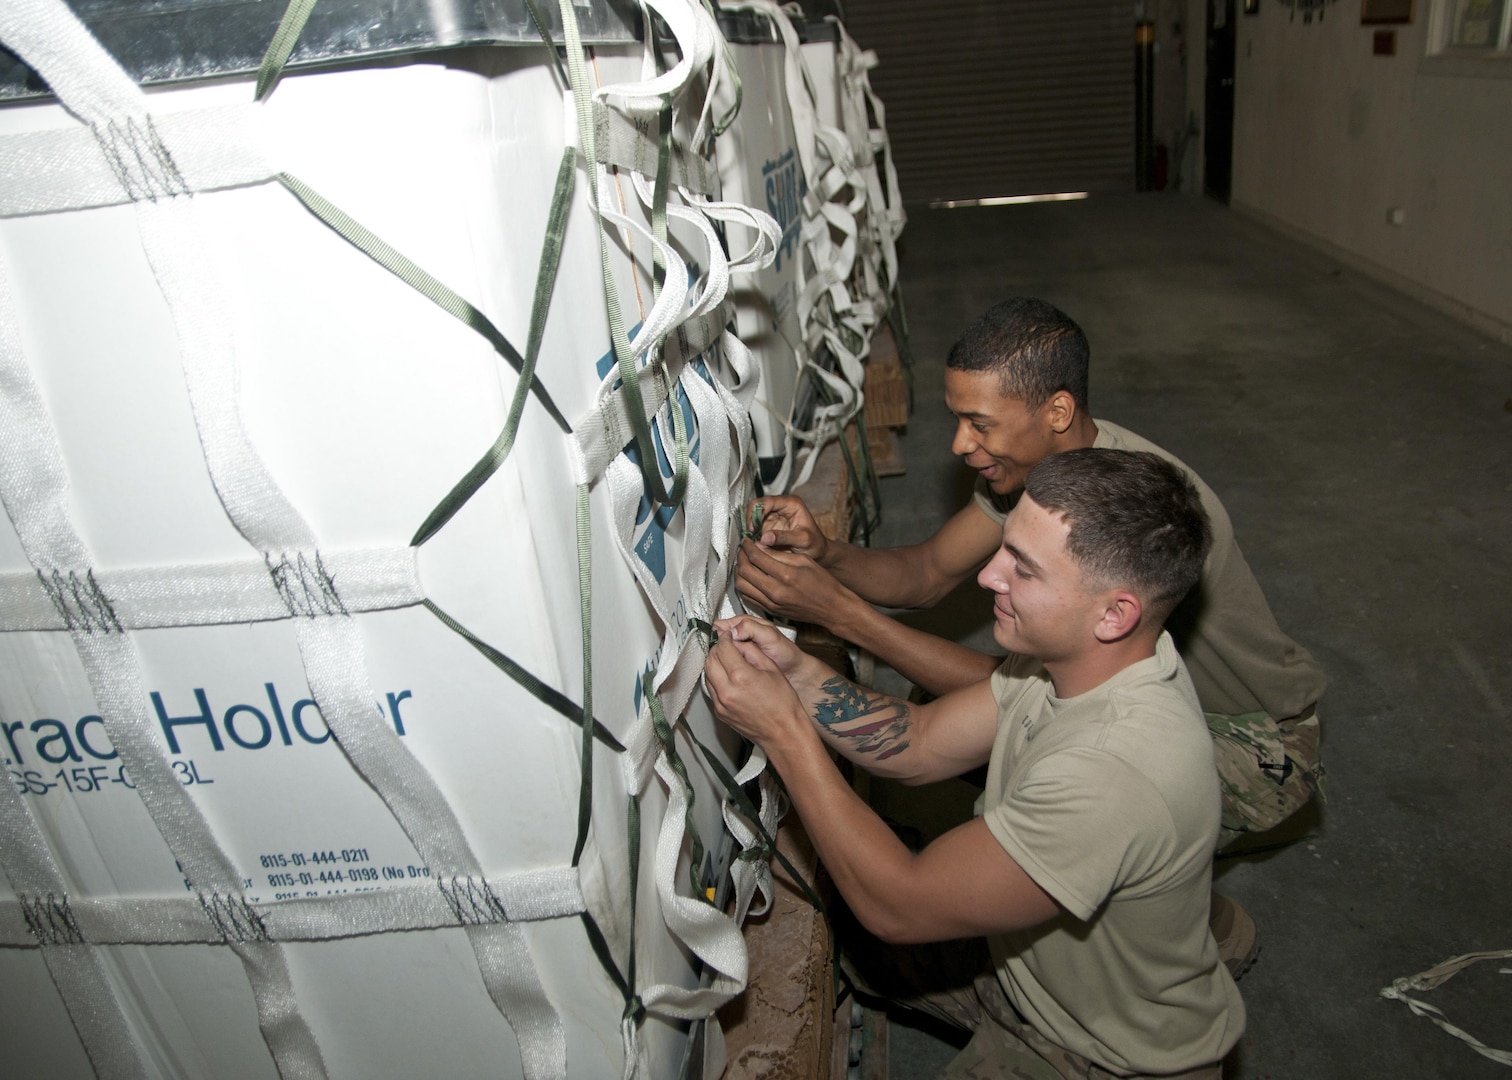 Pfc. Noah Buckhouse and Spc. John Caulder of the 824th Quartermaster Company, secure a container with cargo netting for aerial delivery at Al Udeid Air Base, Qatar on April 25, 2017. Aerial delivery operations are essential for getting supplies to troops in the Middle East when conventional means of transportation are not feasible. (U.S. Army photo by Sgt. Jeremy Bratt)